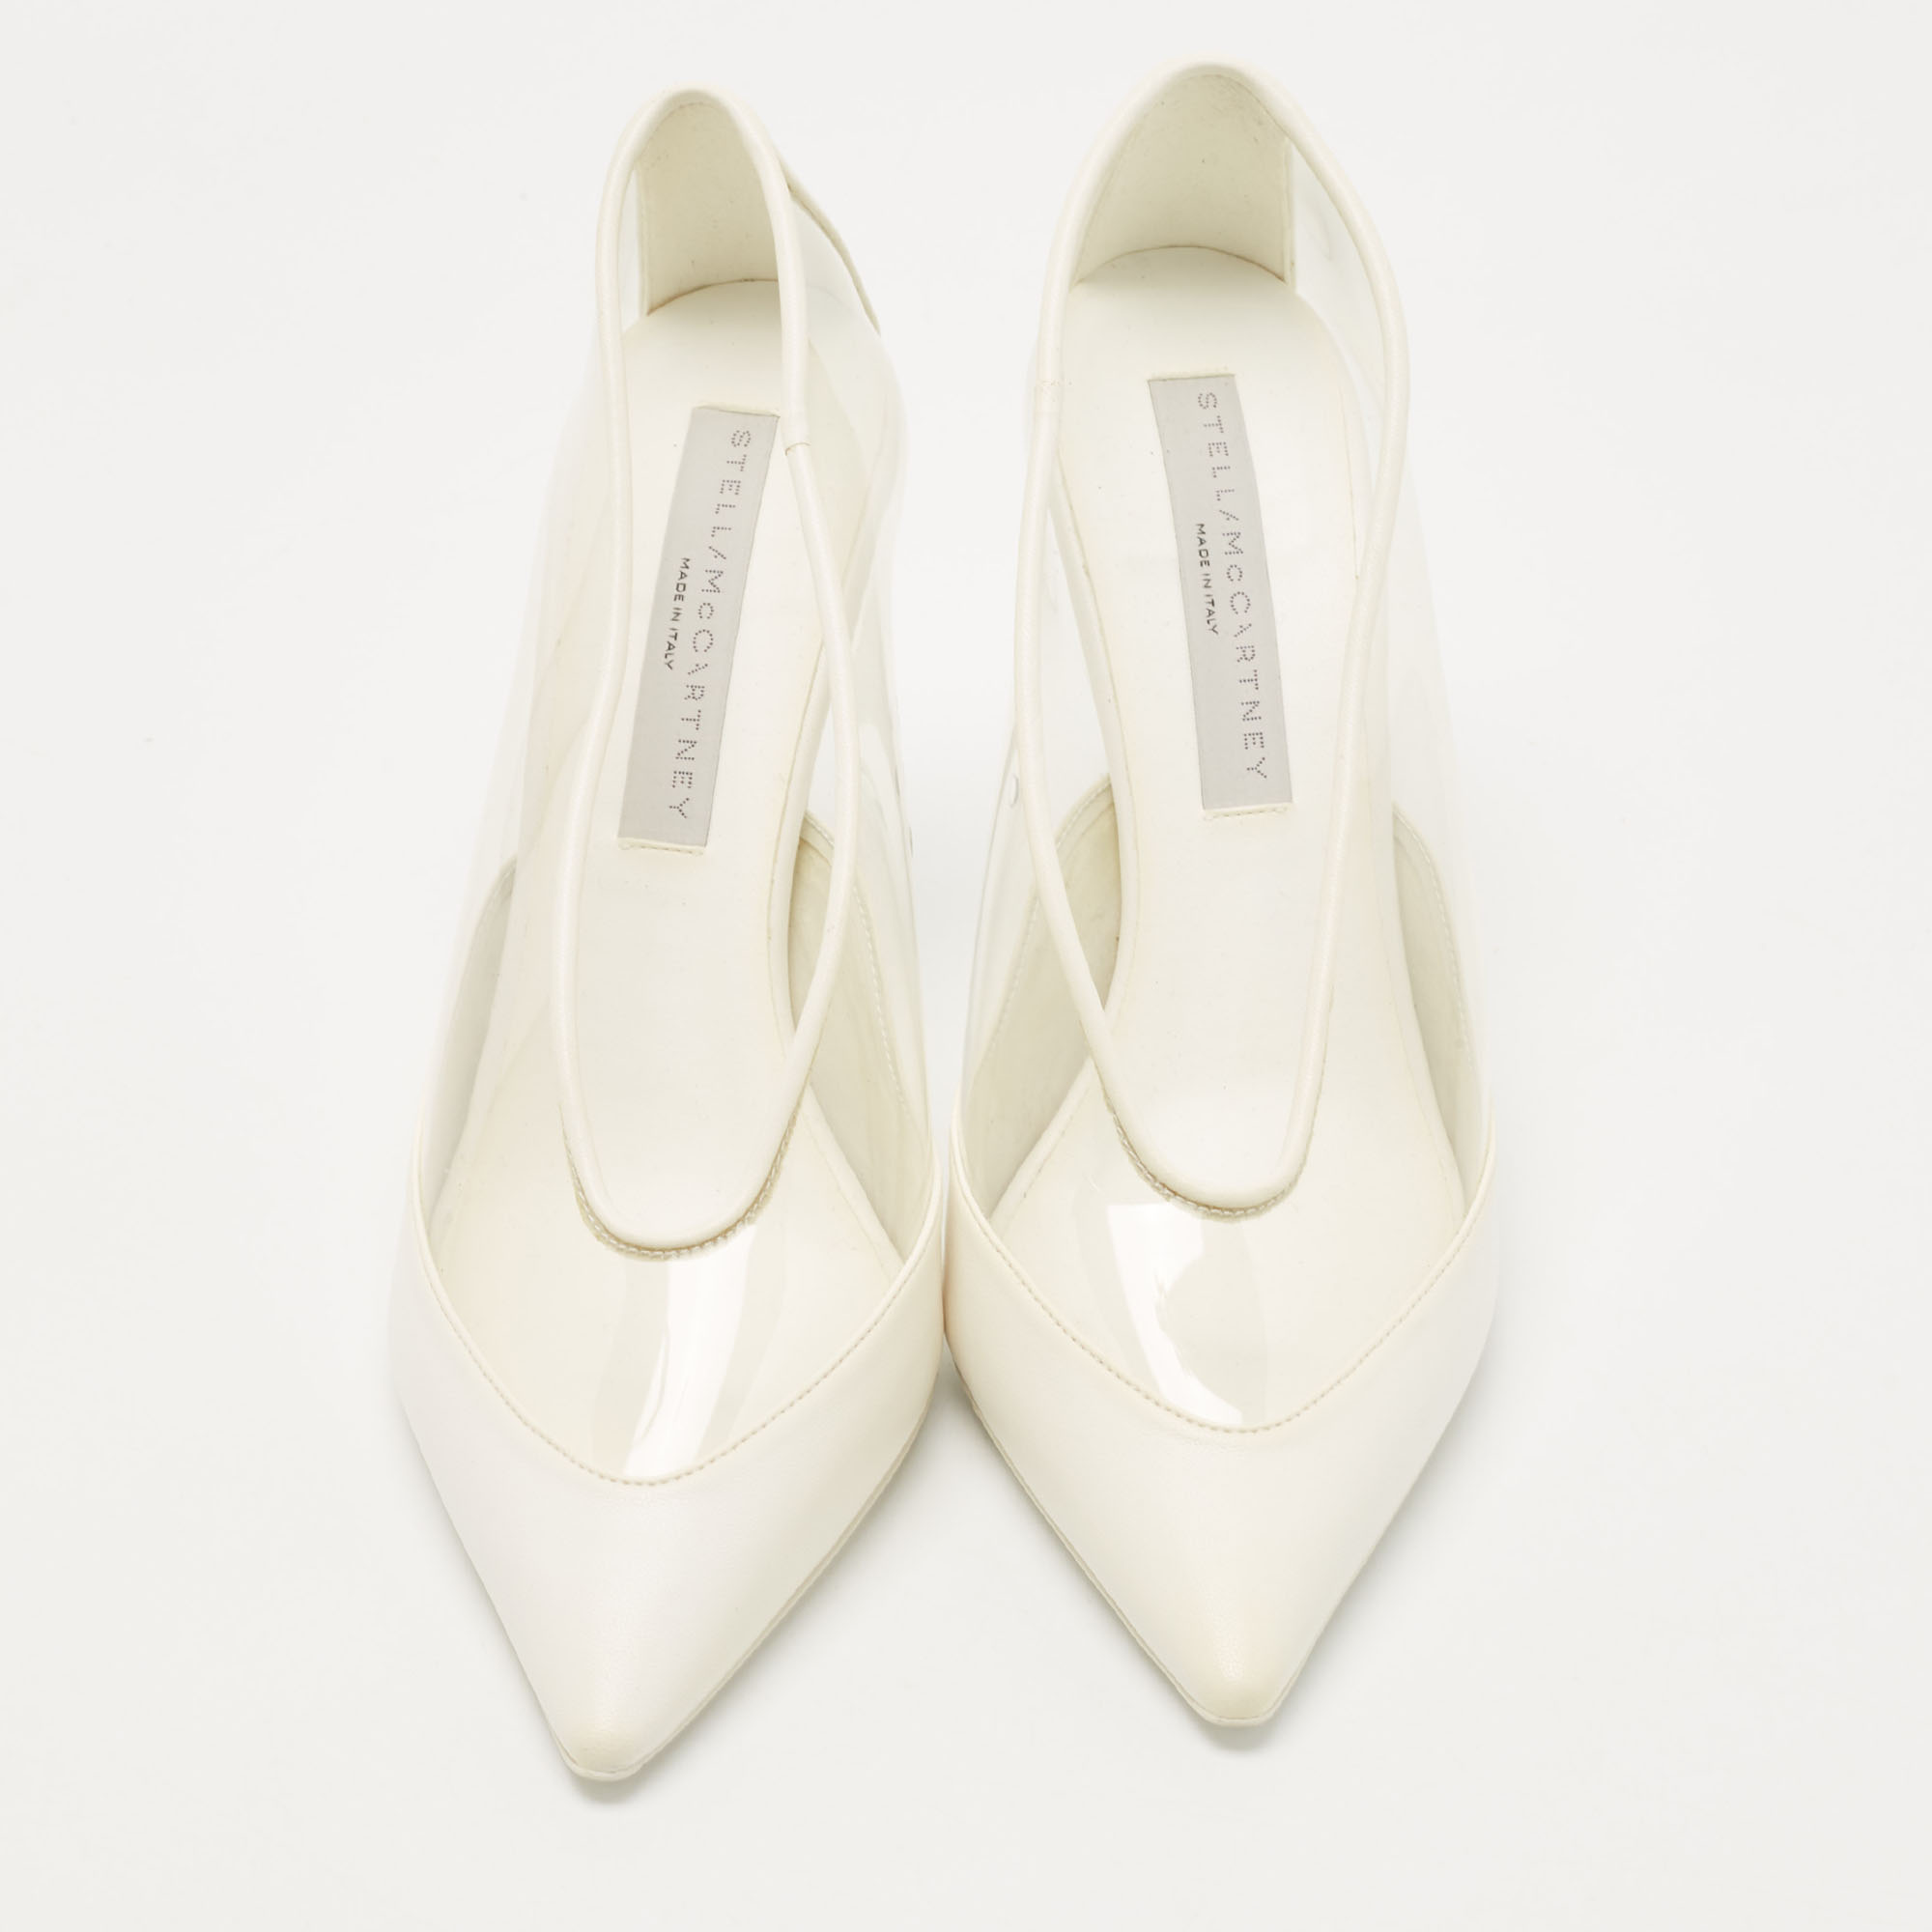 Stella McCartney White Faux Leather And PVC Pointed Toe Pumps Size 38